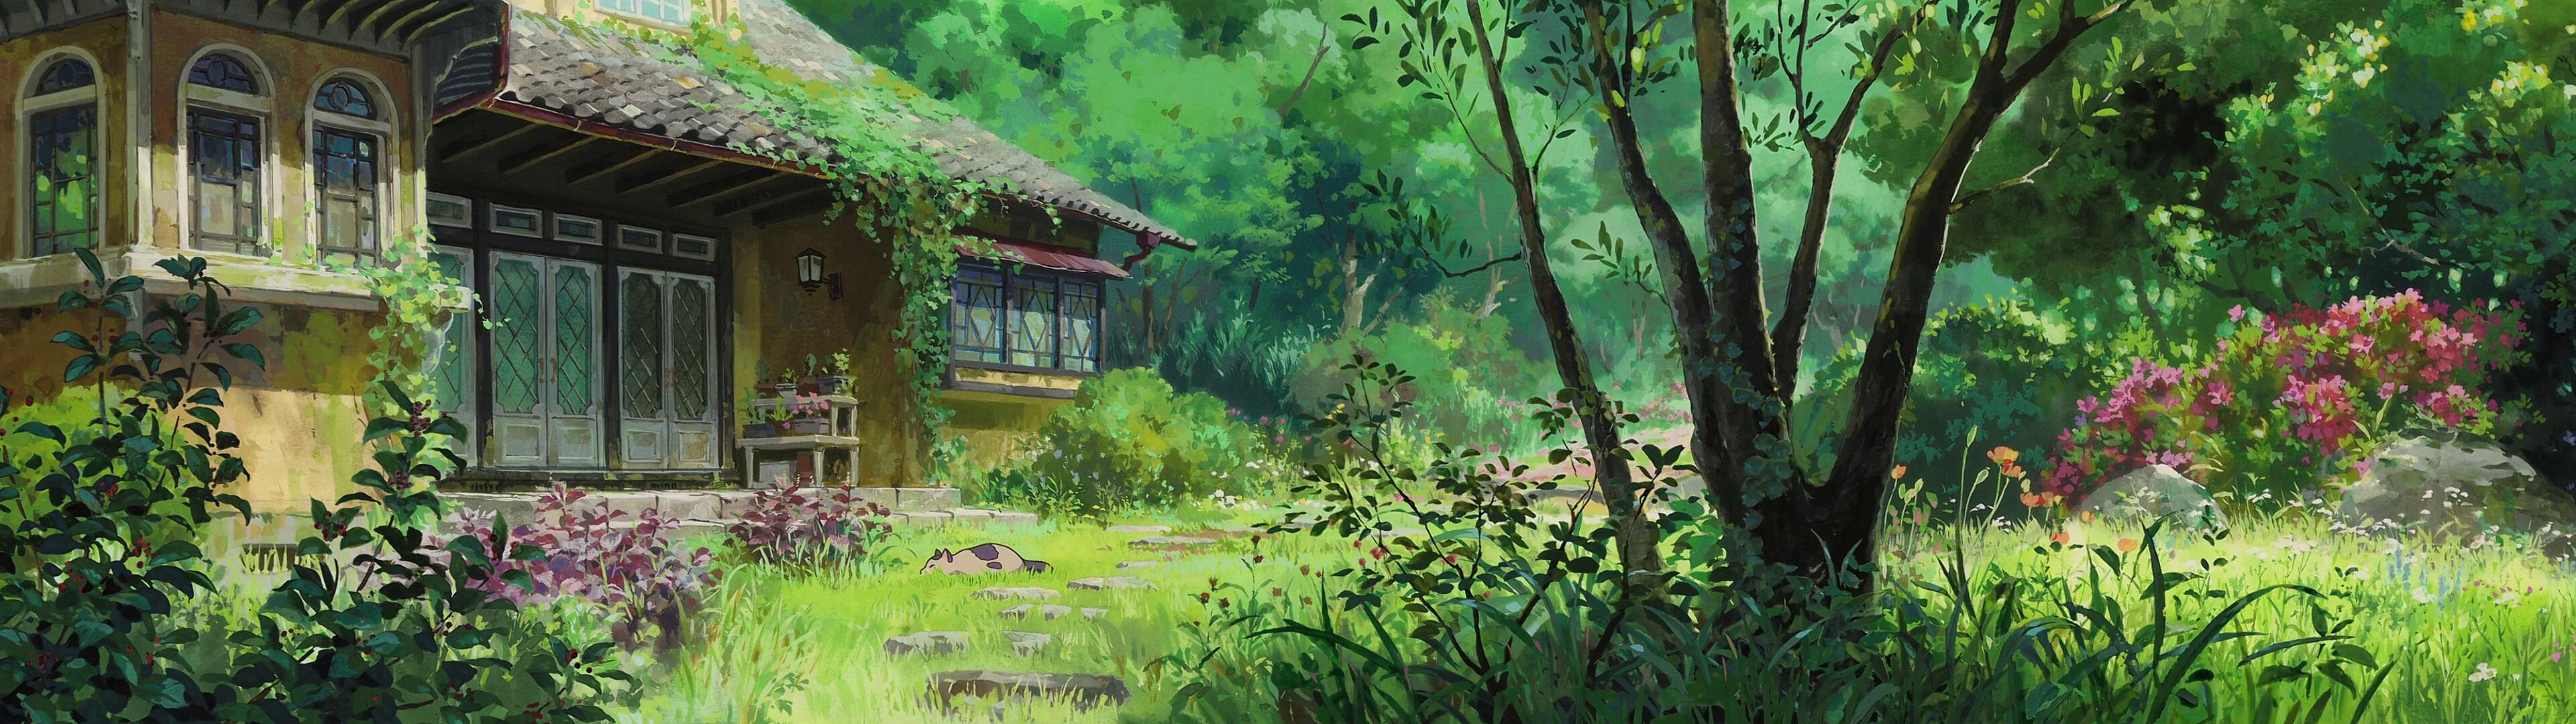 Studio Ghibli: Isao Takahata was a prominent director associated with the company. 3840x1080 Dual Screen Background.